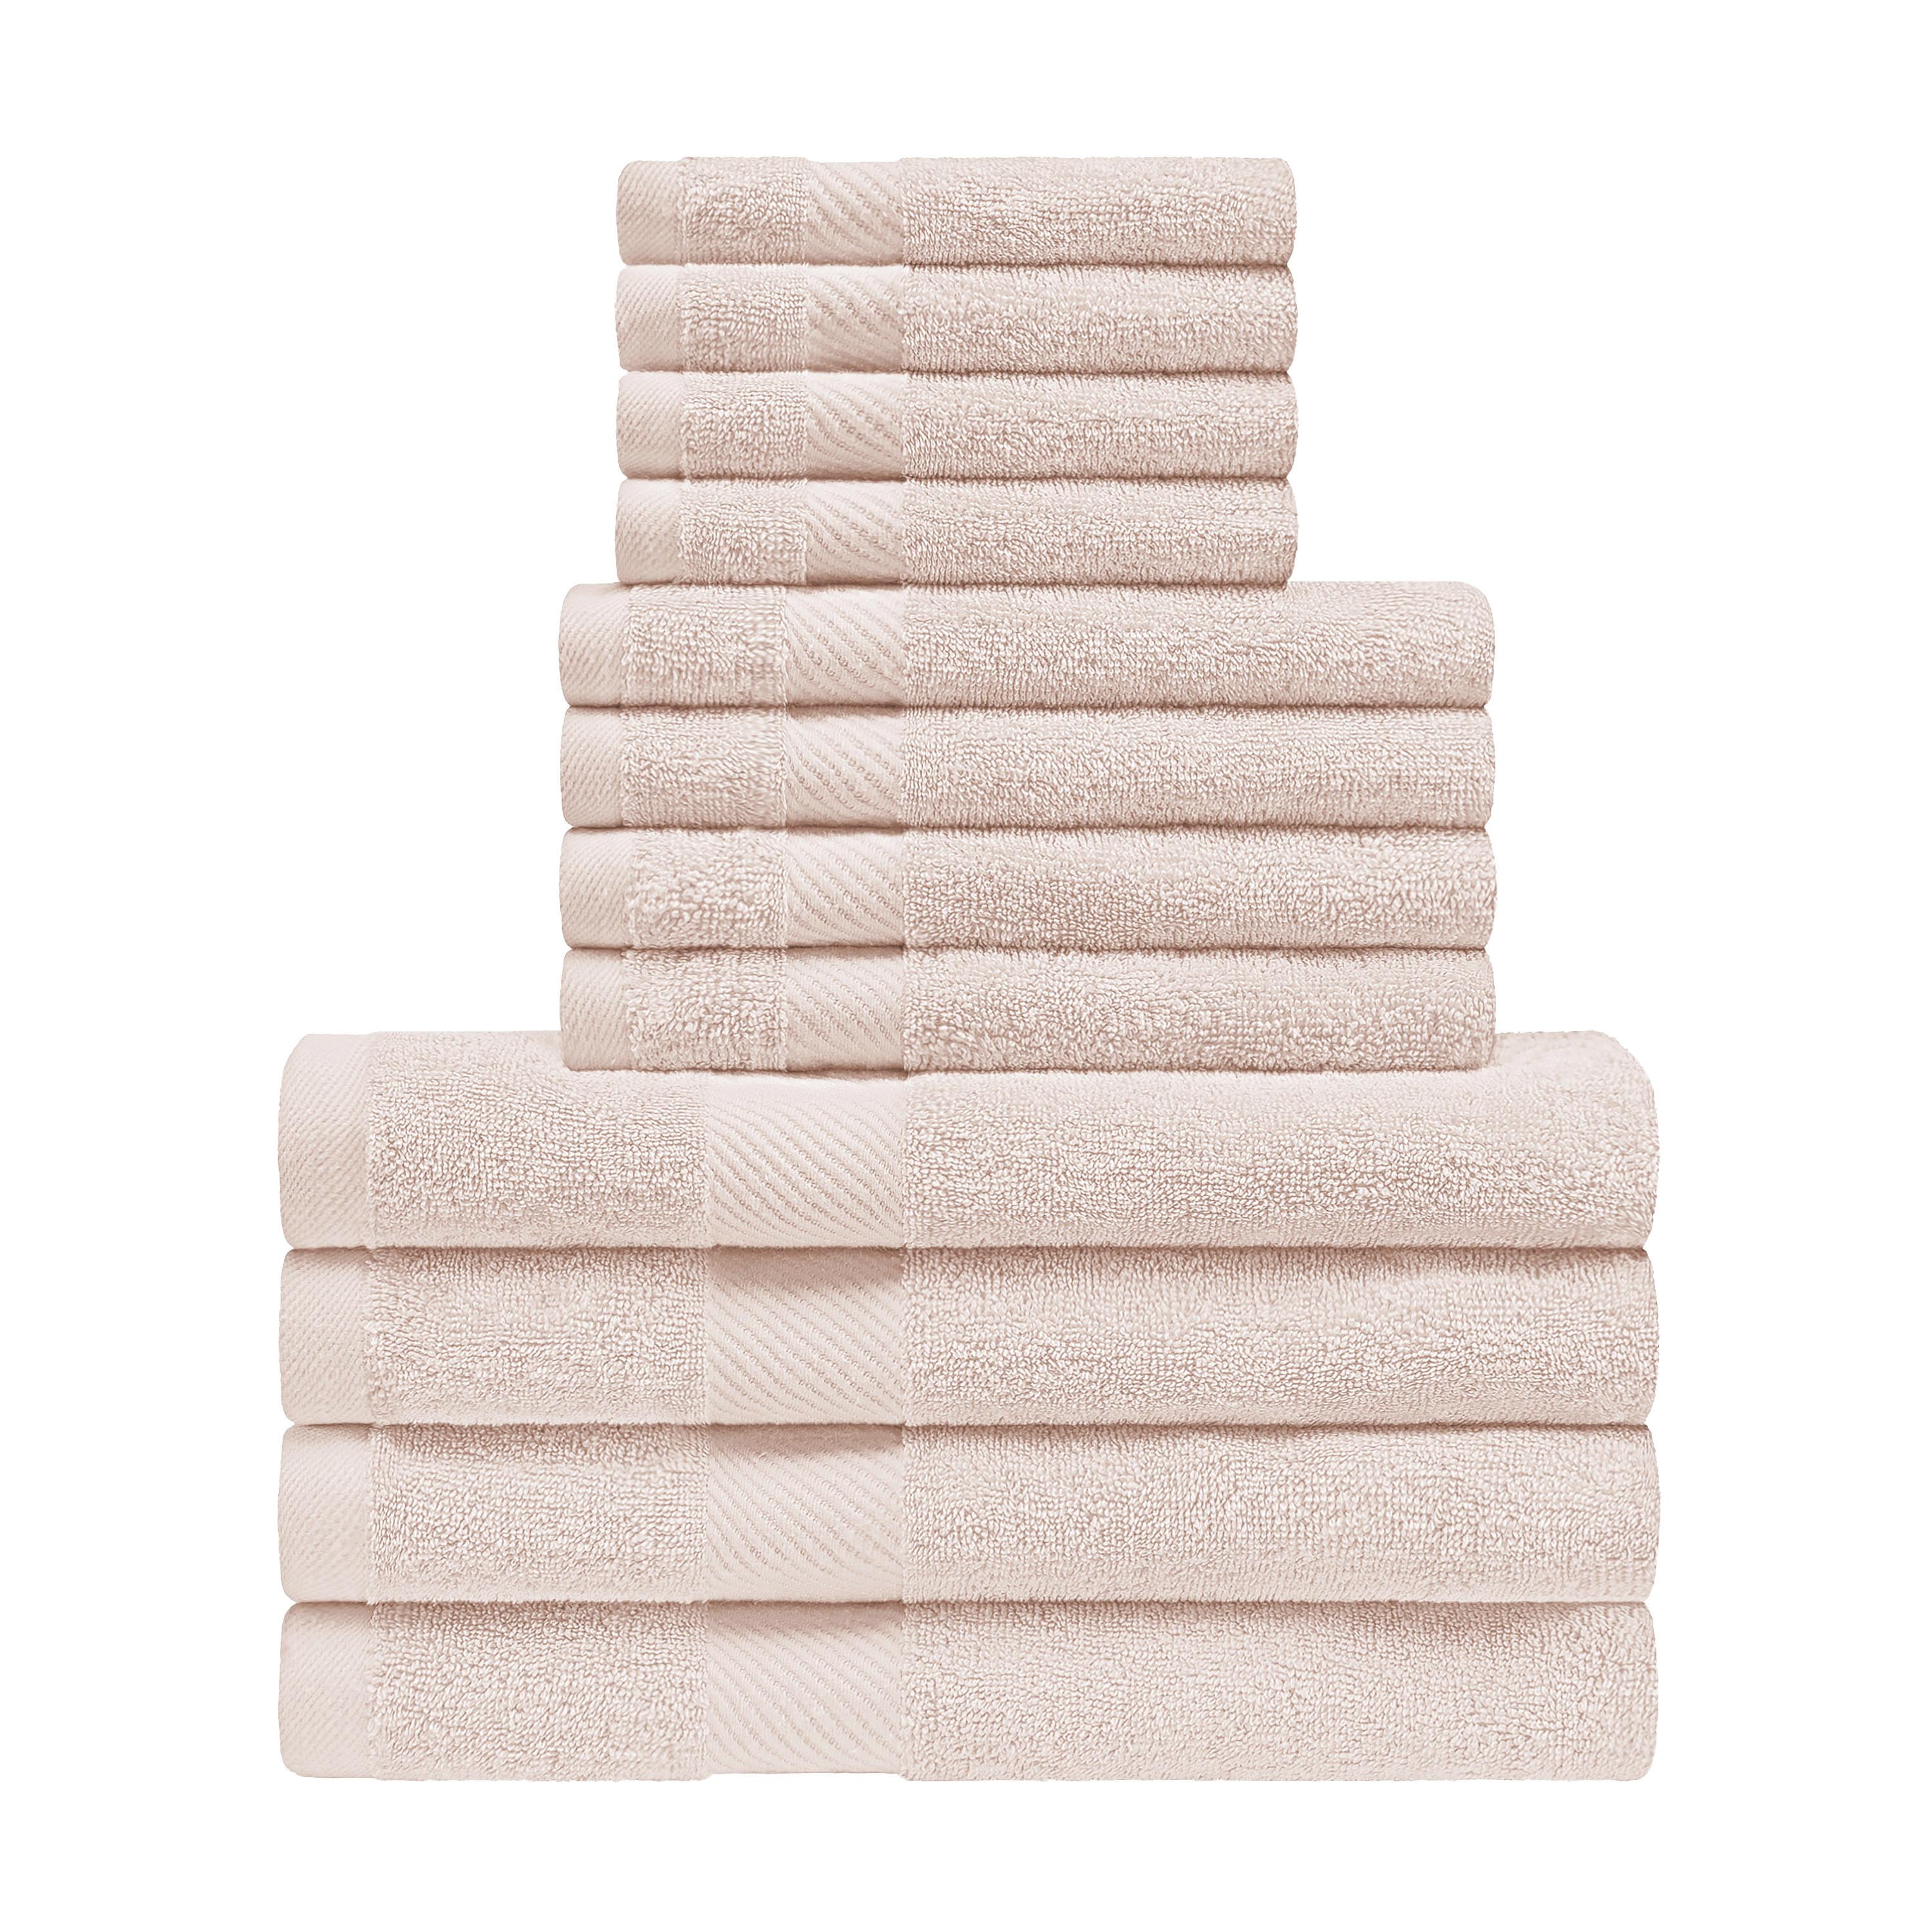 Superior Niles Egyptian Giza Cotton Dobby Ultra-Plush Absorbent Hand Towel Set of 6 - Gold